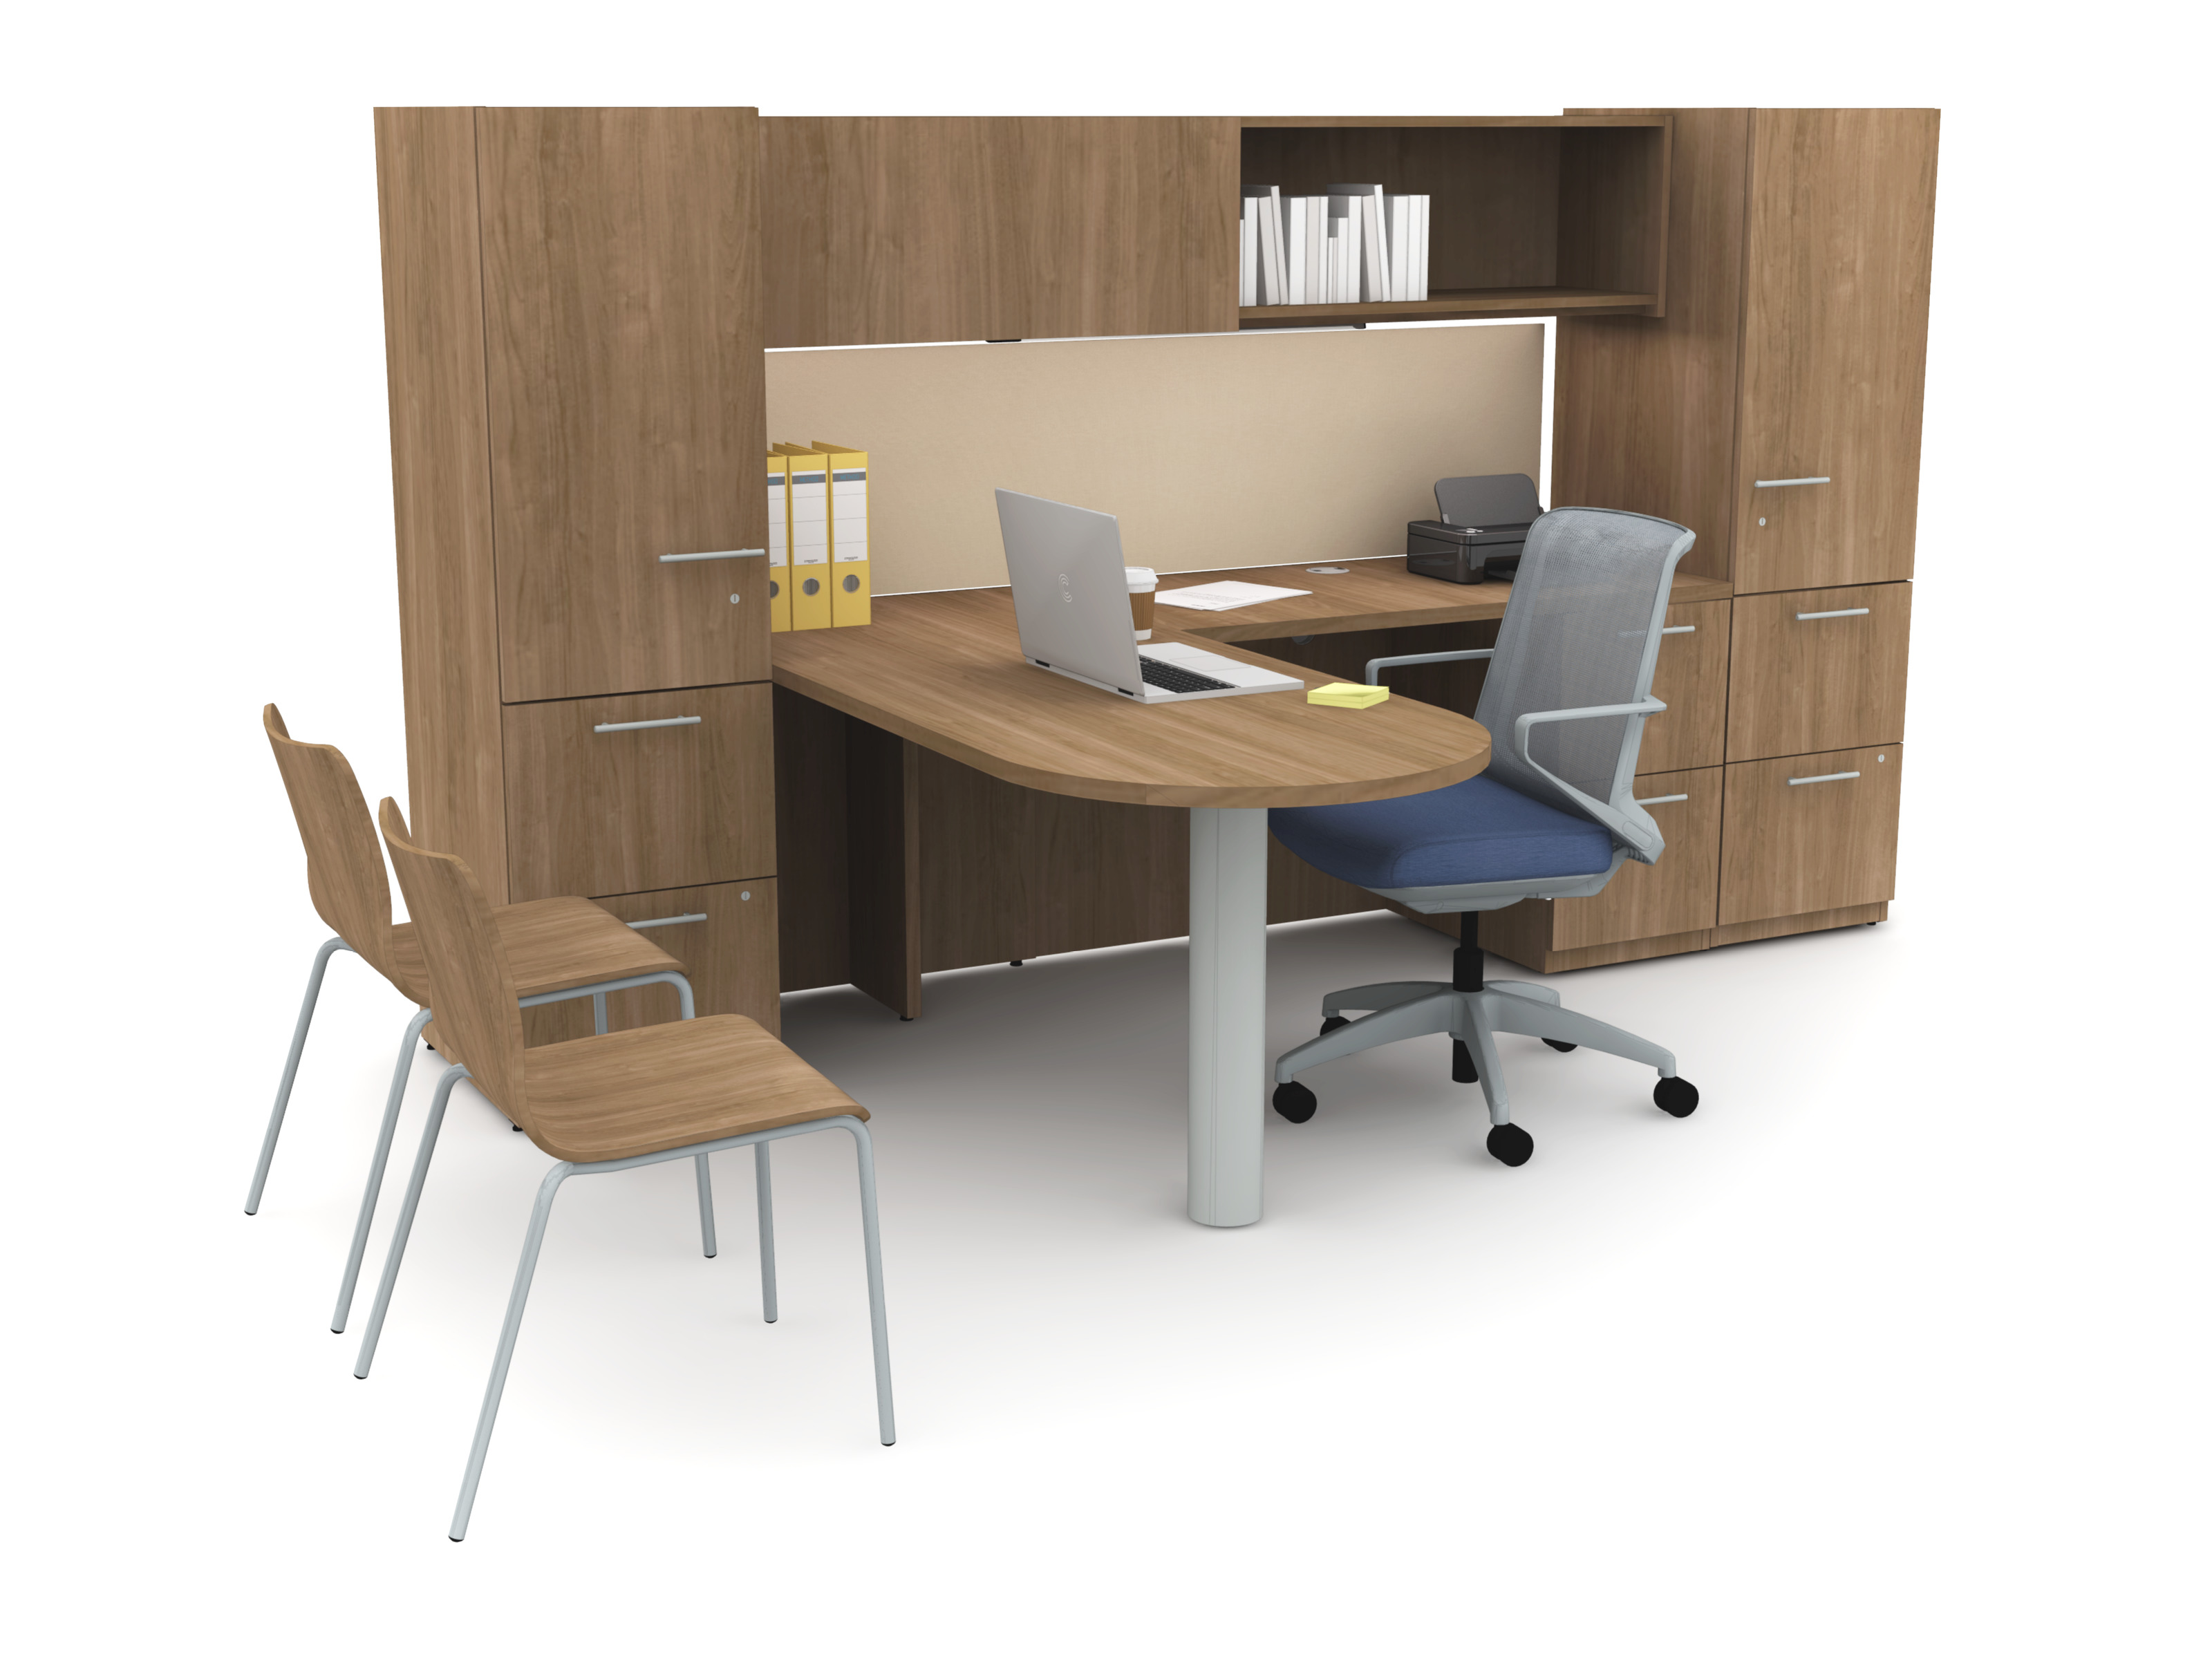 Concinnity - Peninsula Desk with Storage Wall Planning Typical